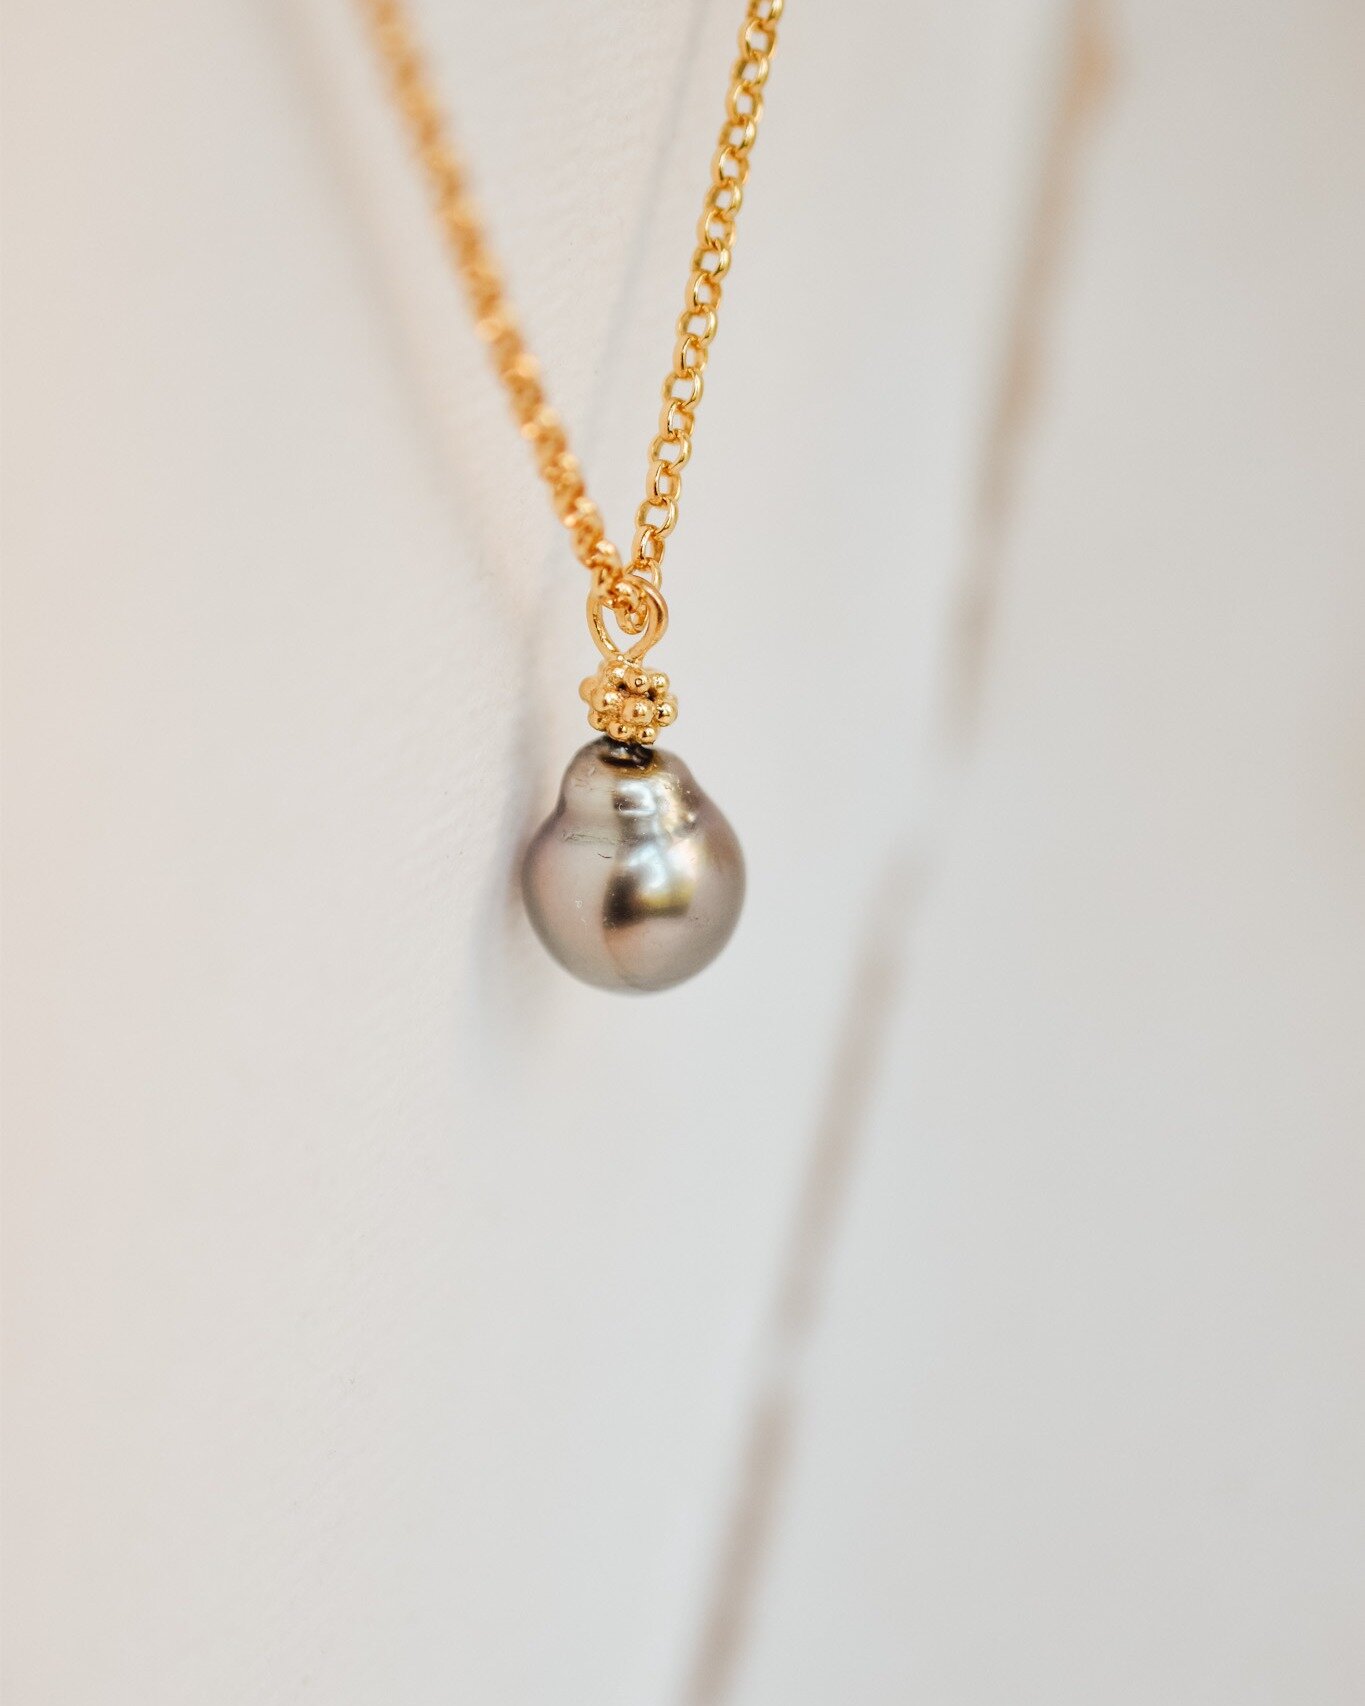 For the minimalist in your life! 
⁠
This one of a kind, gray baroque pearl pendant hangs from a delicate yellow gold chain. This necklace will instantly become your favourite piece to grab every morning!⁠
⁠.
..
.
.
.
 #graypearl #graypearls #graypear